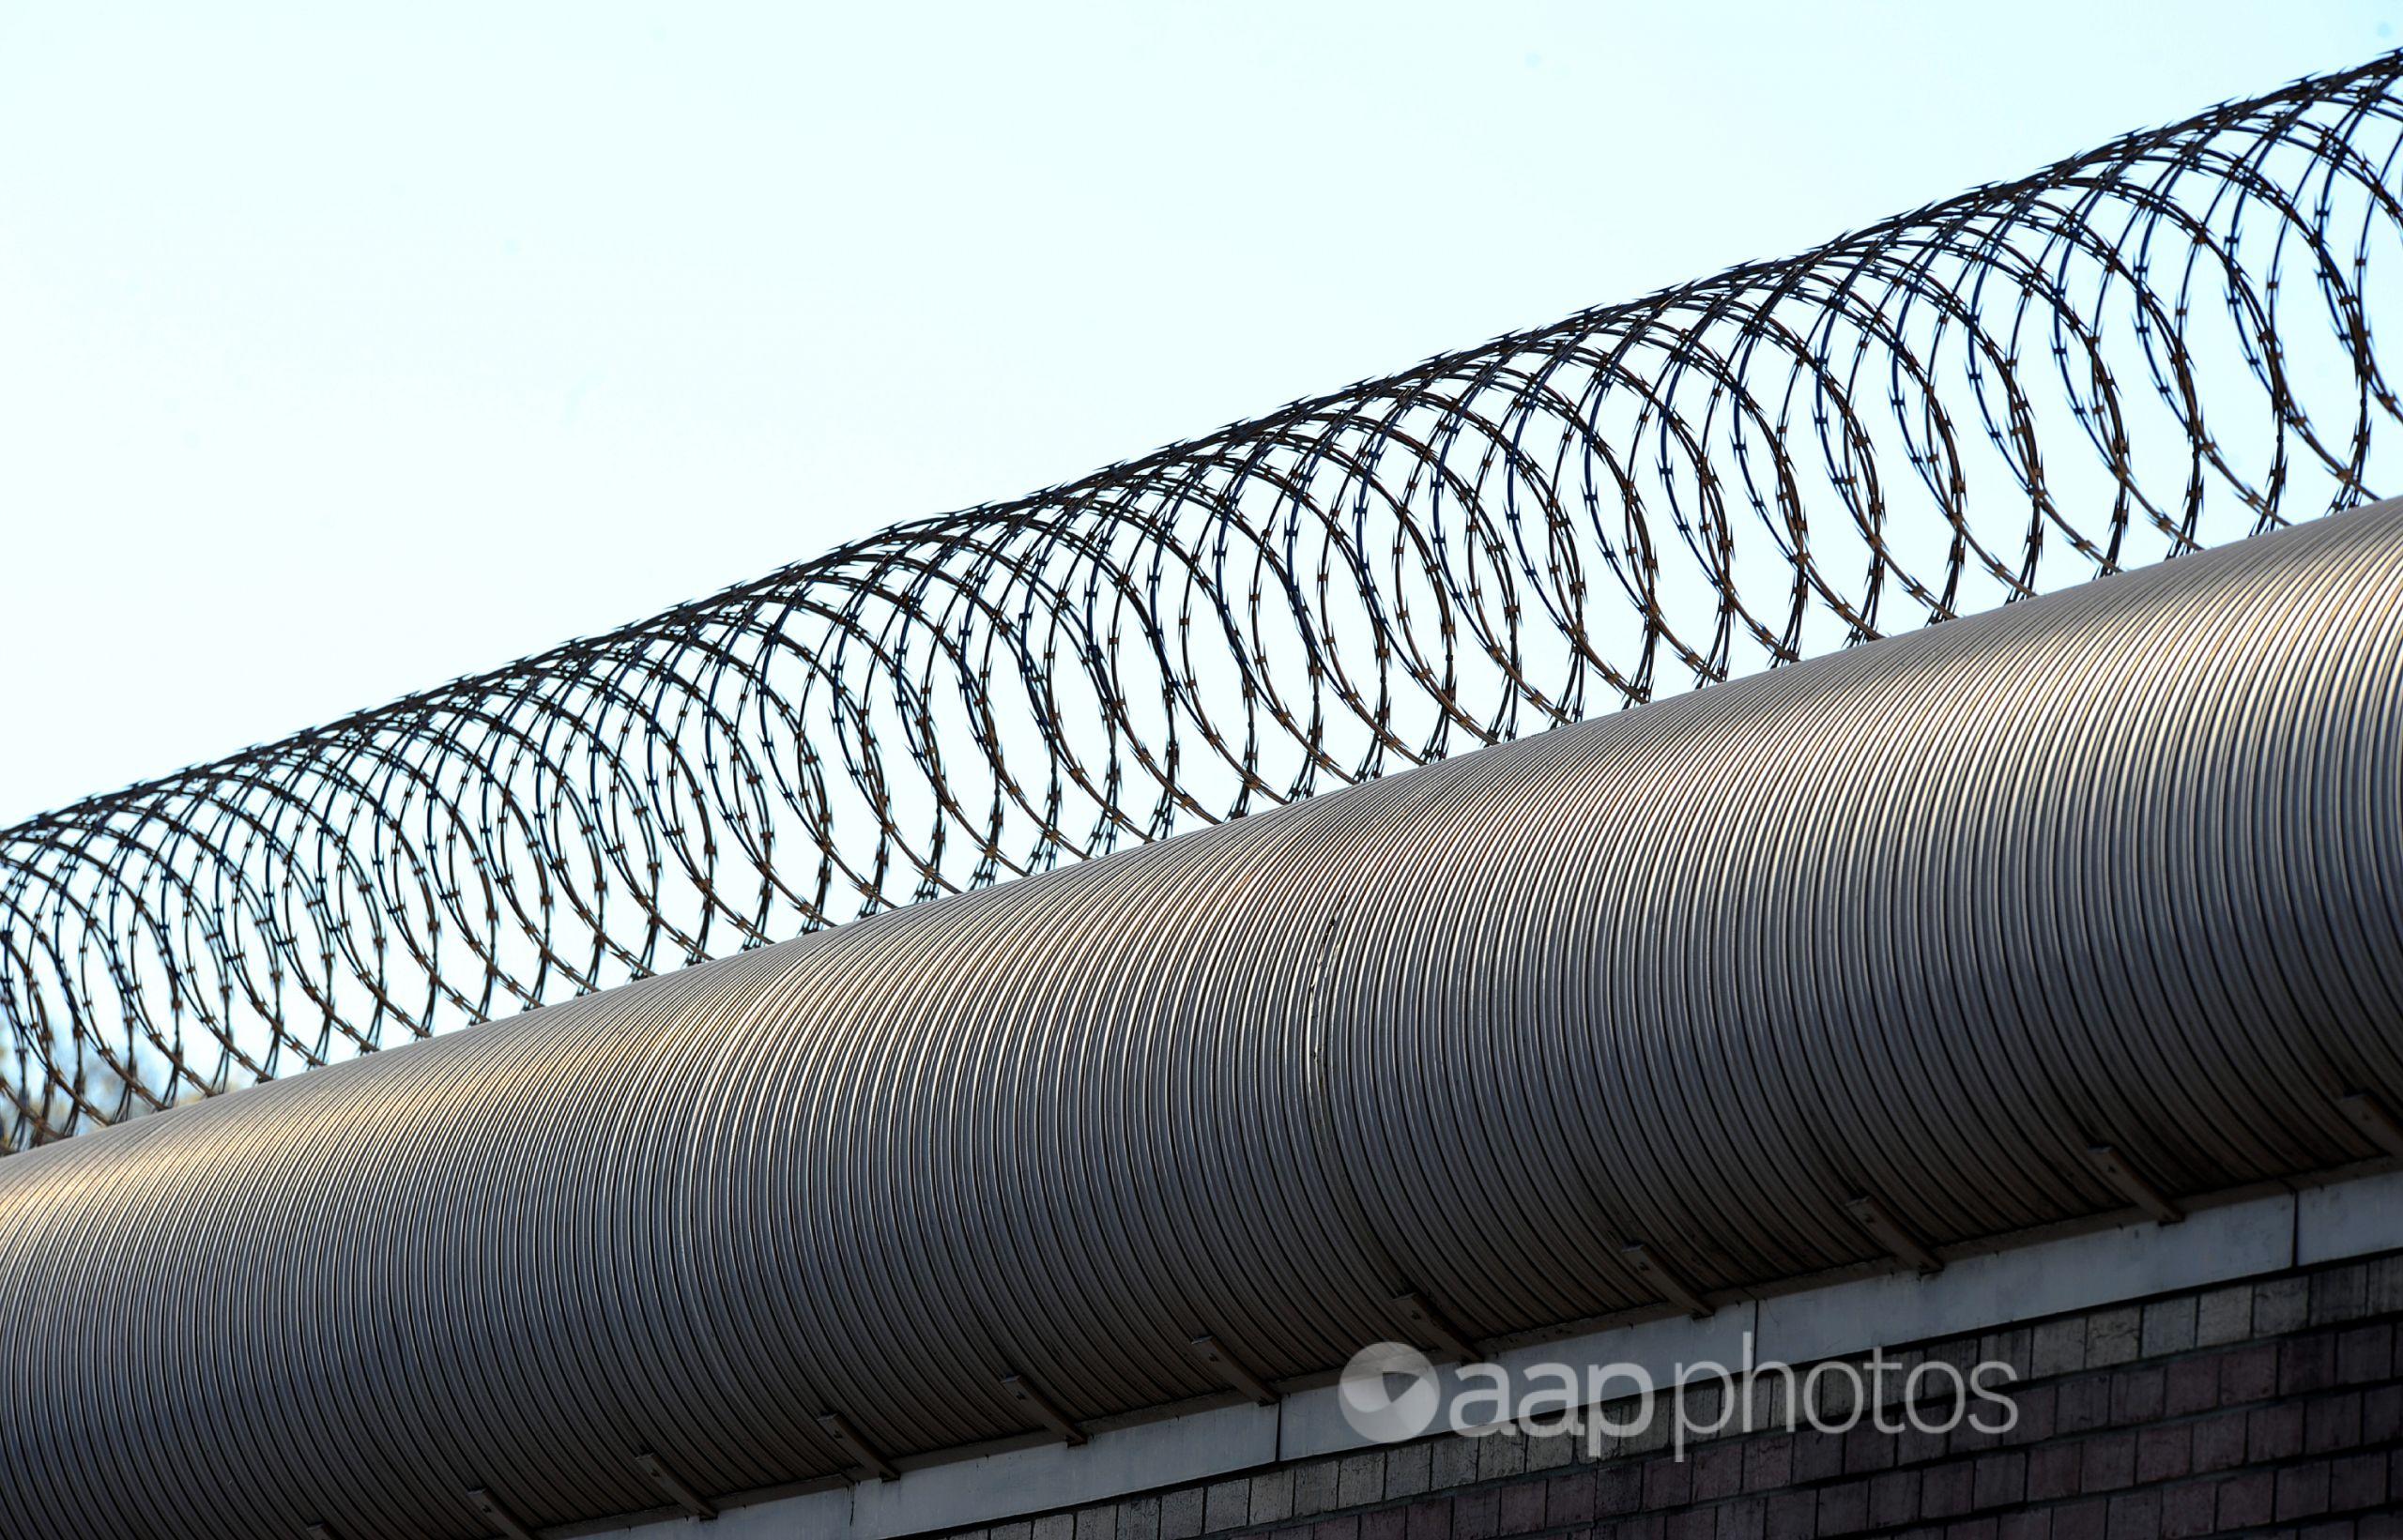 Razor wire on top of a prison fence